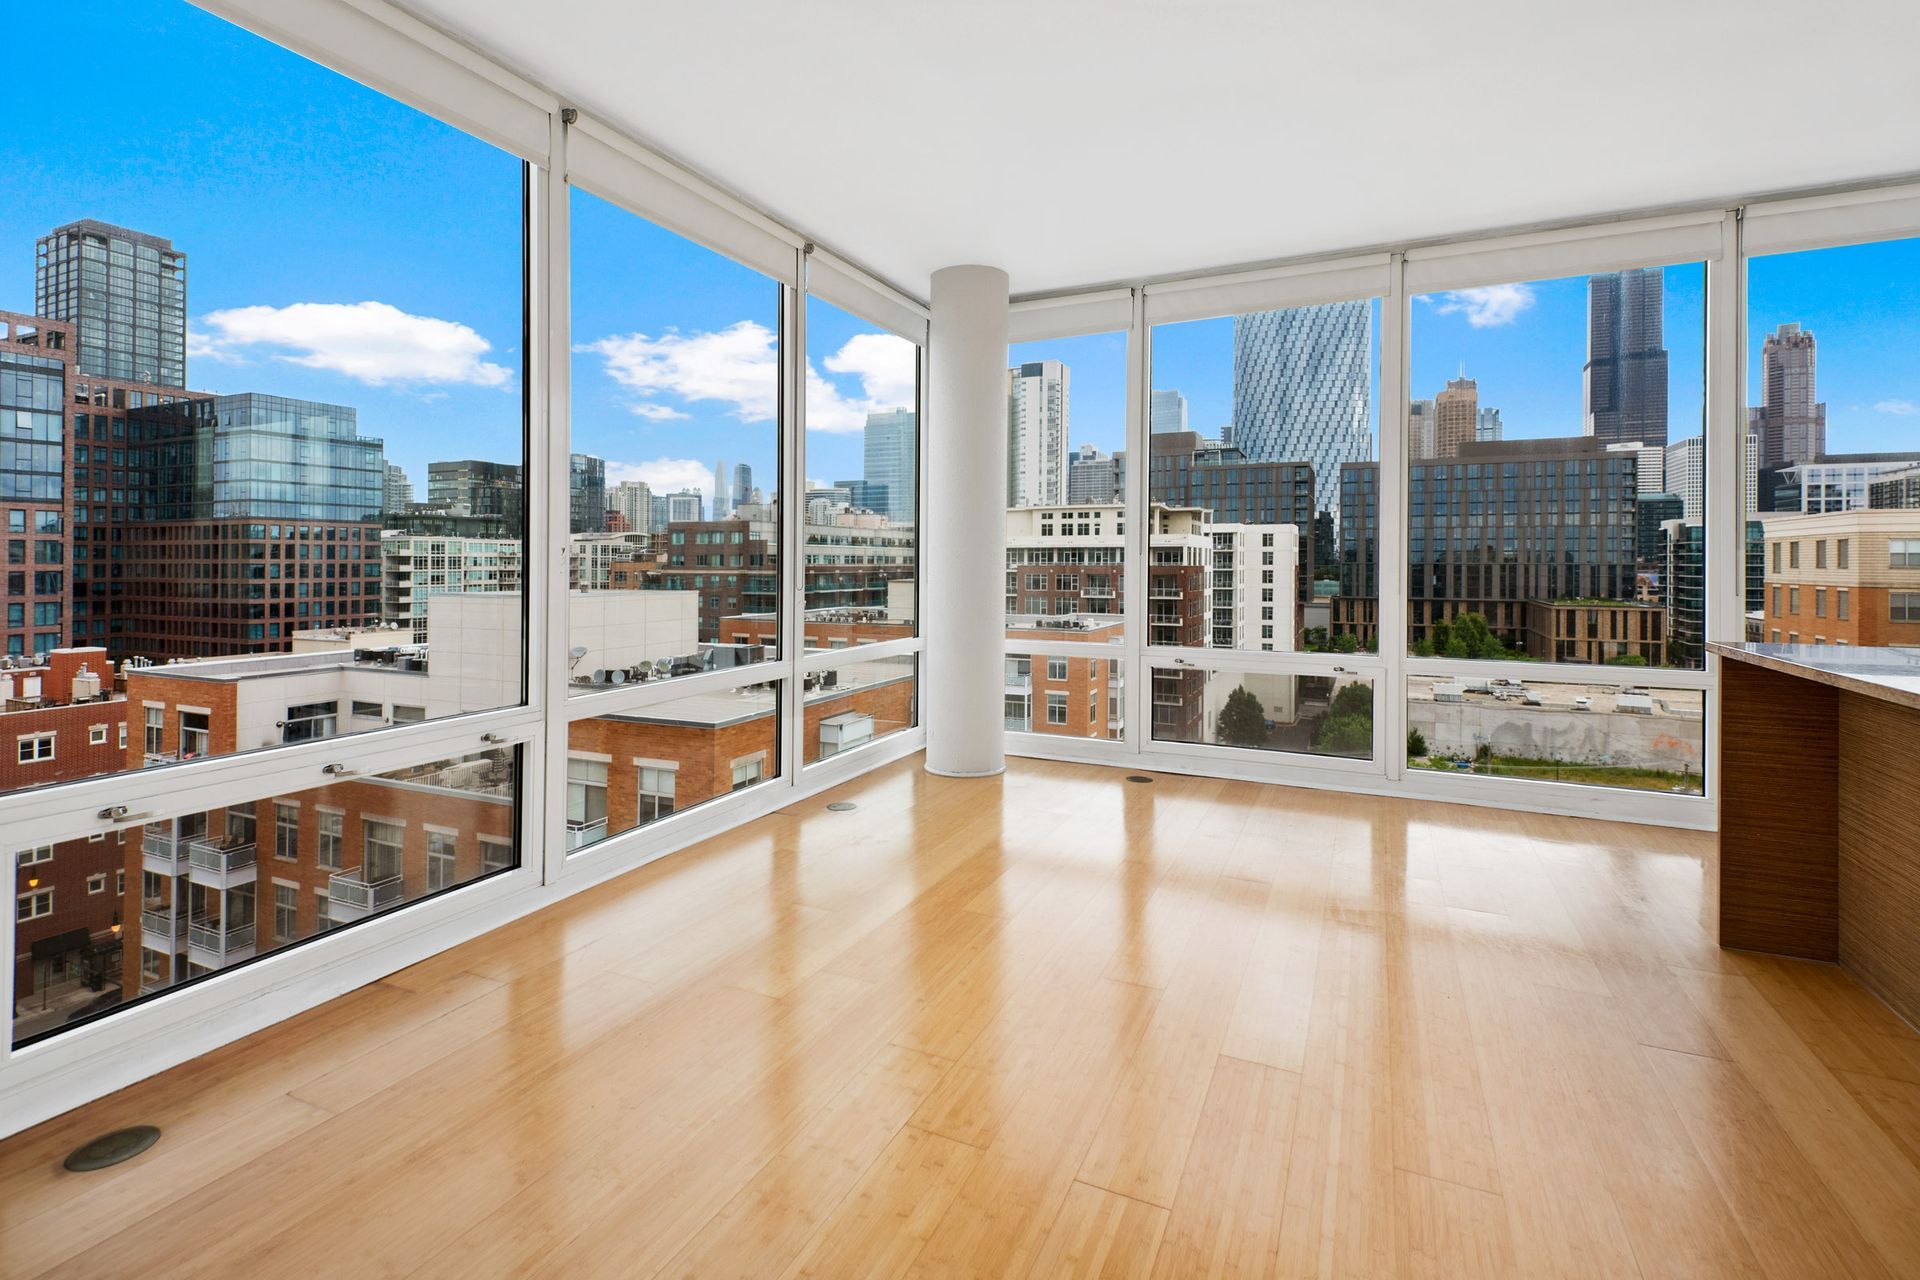 An empty apartment with lots of windows and a view of the city at 24 S Morgan Apartments.